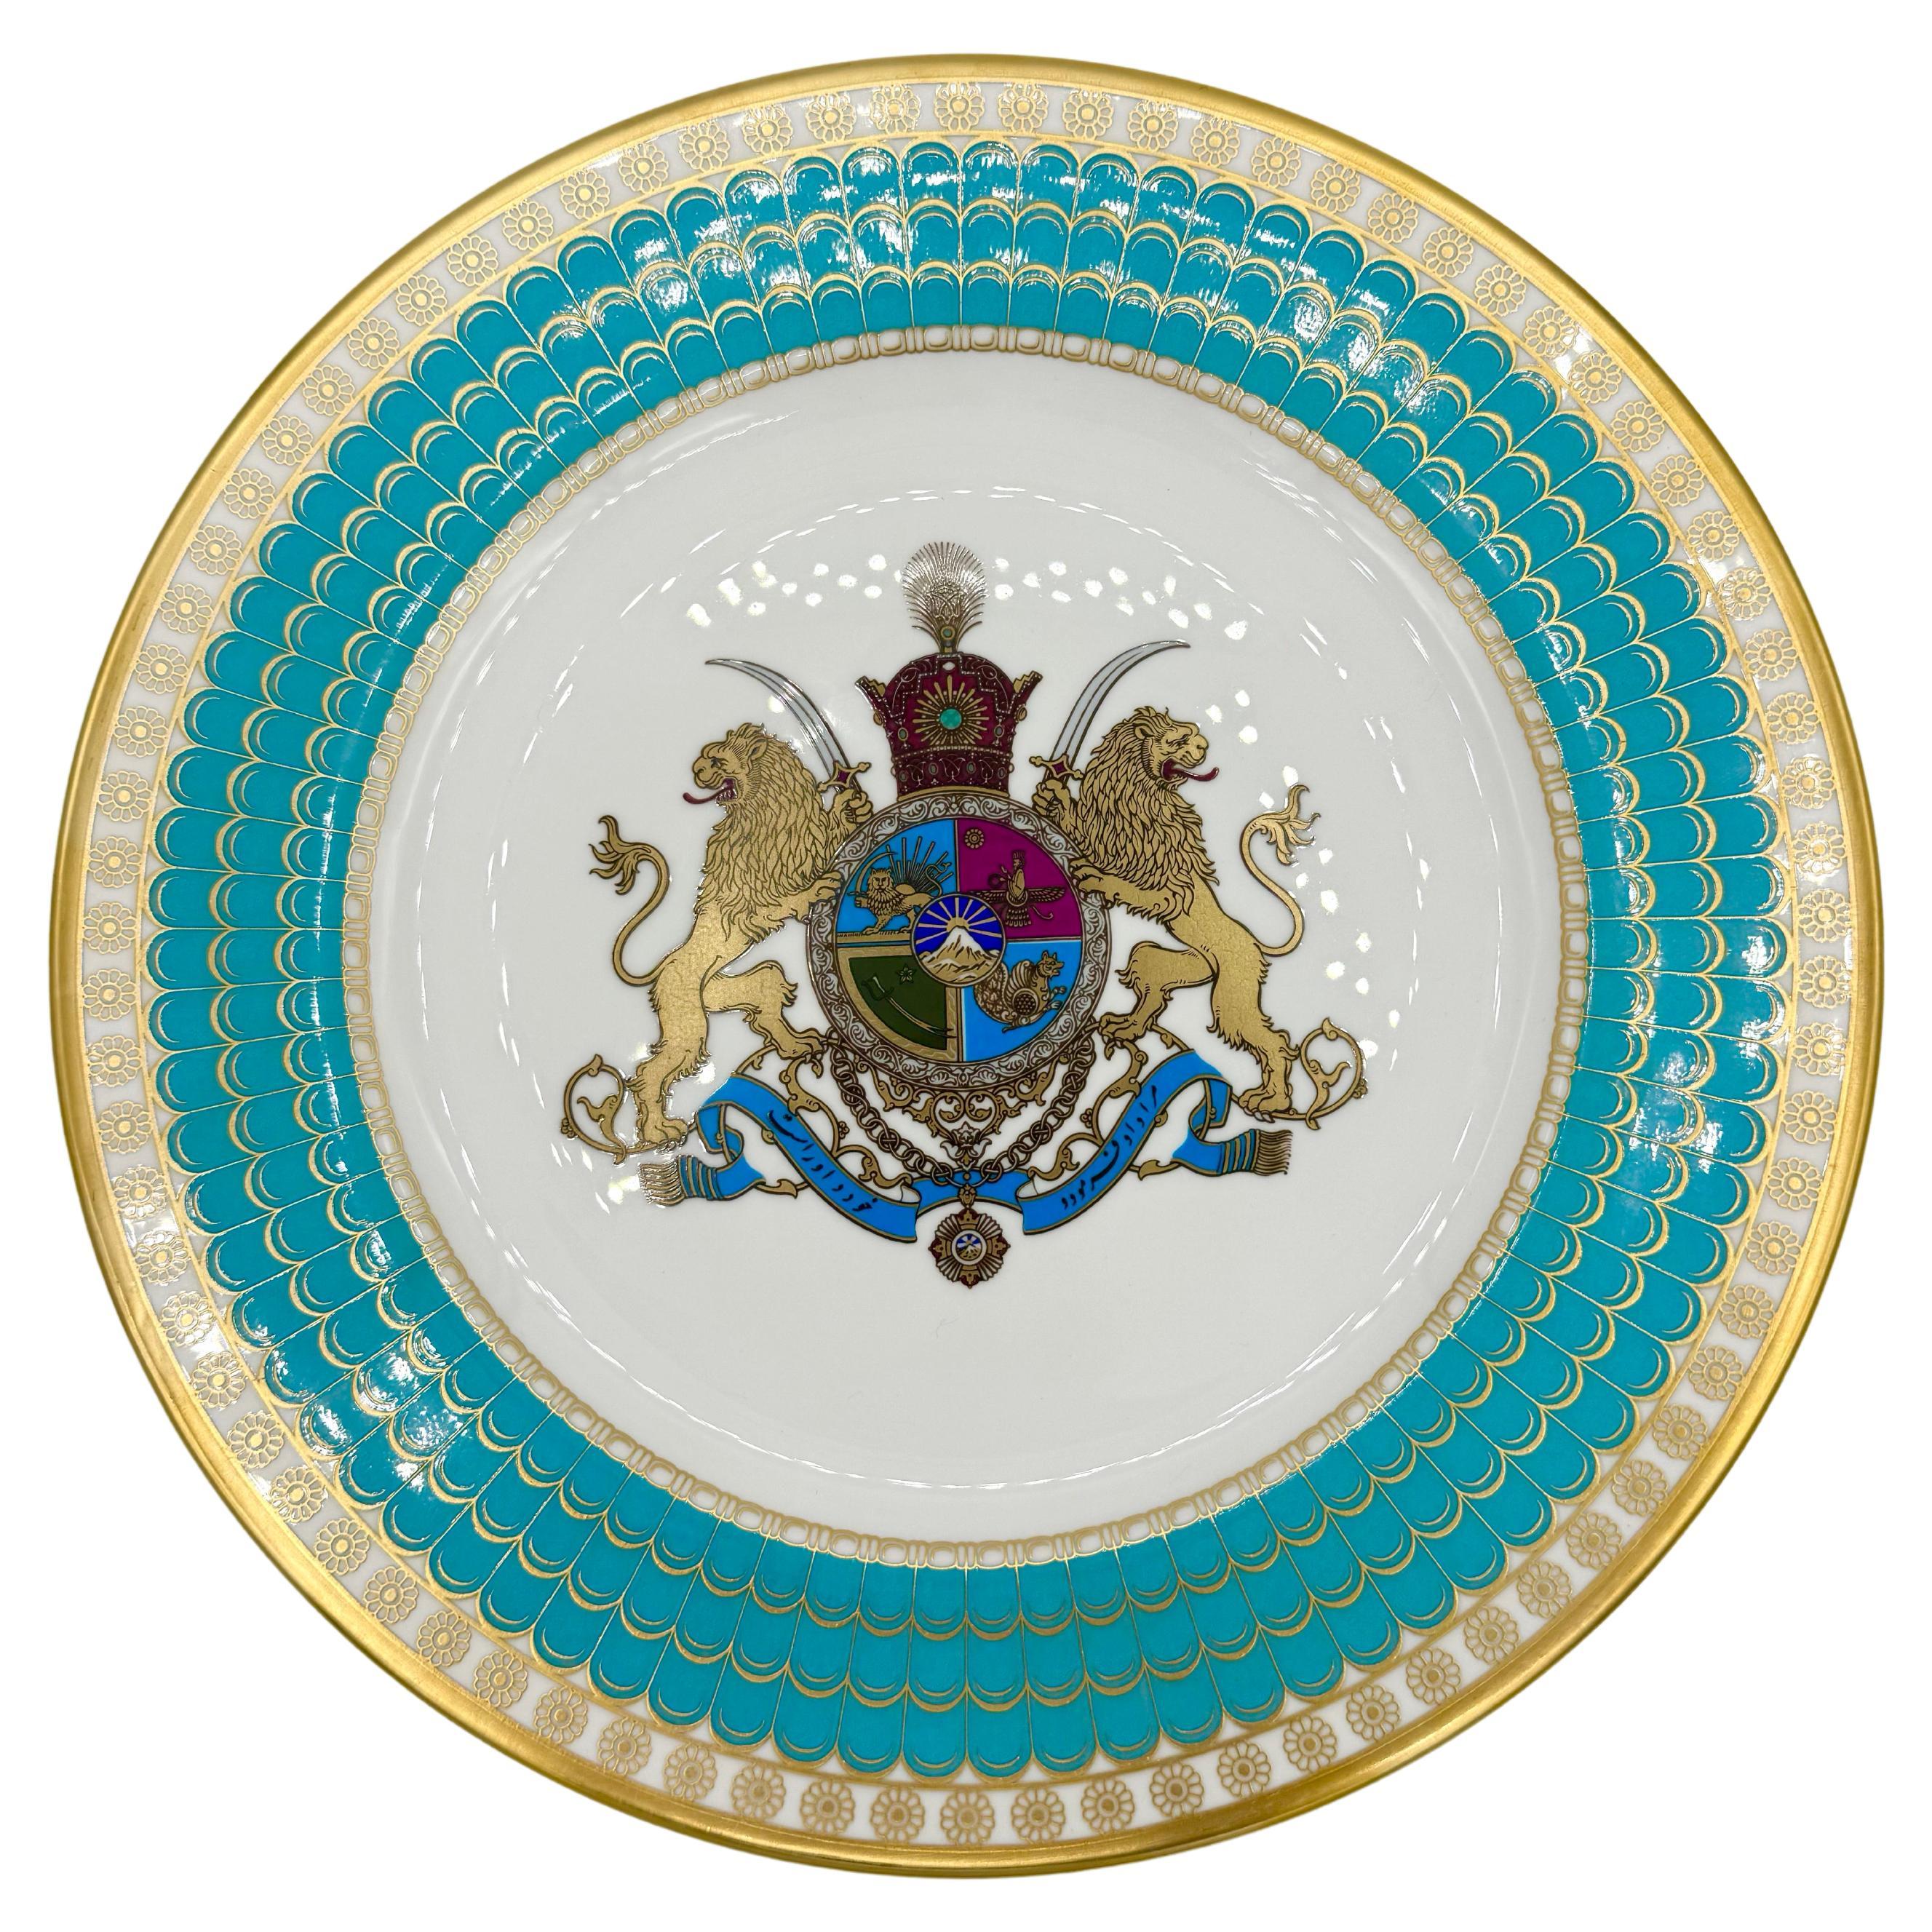 The Imperial Plate of Persia Limited Edition 